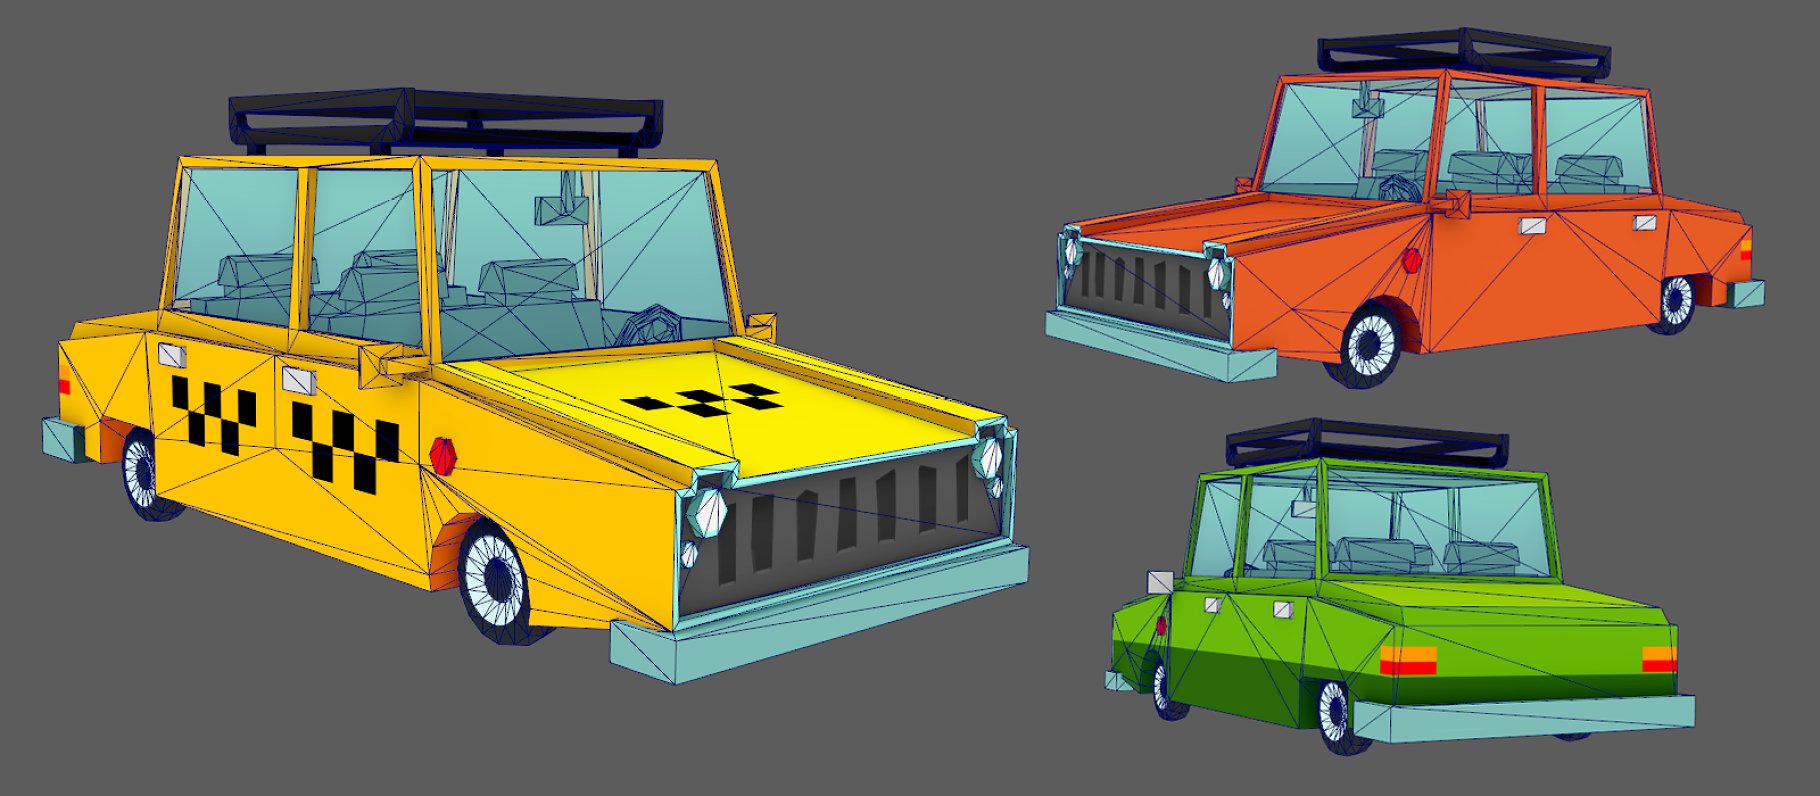 3 different illustrations of low poly cars on a gray background.